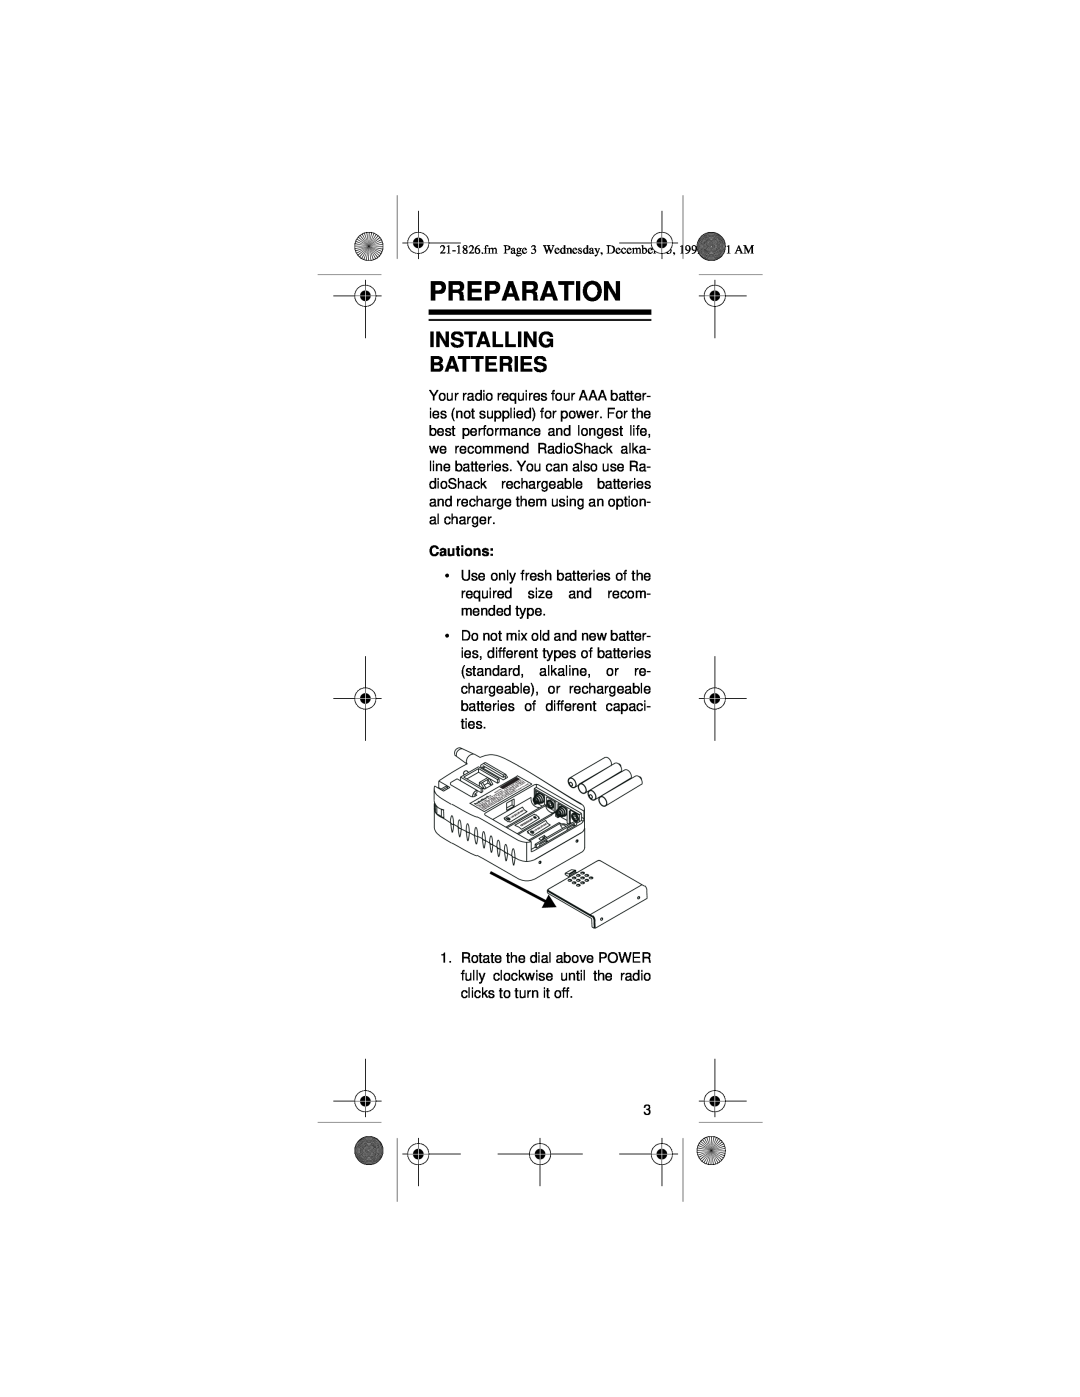 Rosewill 21-1829, 21-1826, 21-1828 owner manual Preparation, Installing Batteries, Cautions 